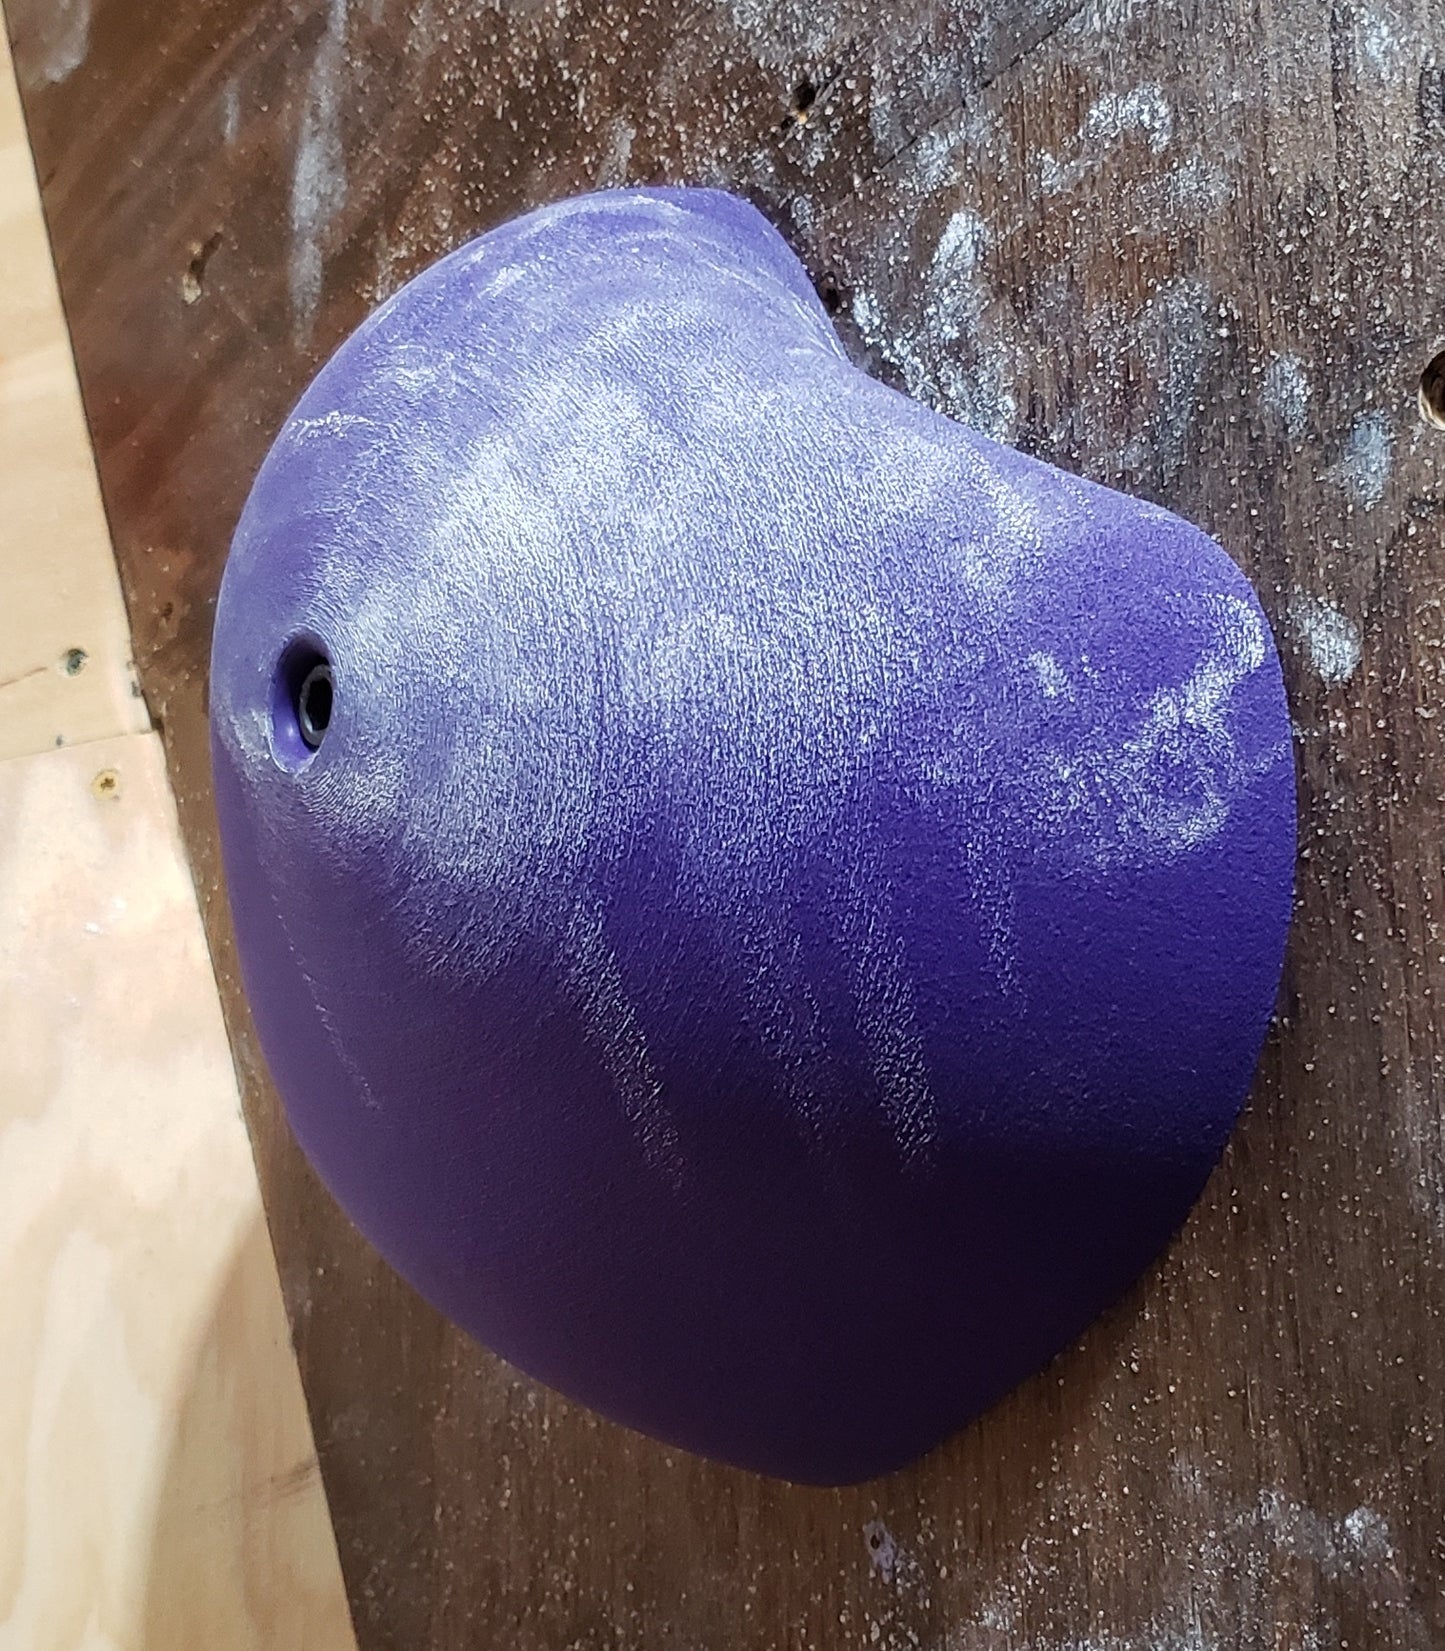 Large Slopers, 2 Bolt On Climbing Holds, Homewall Macros